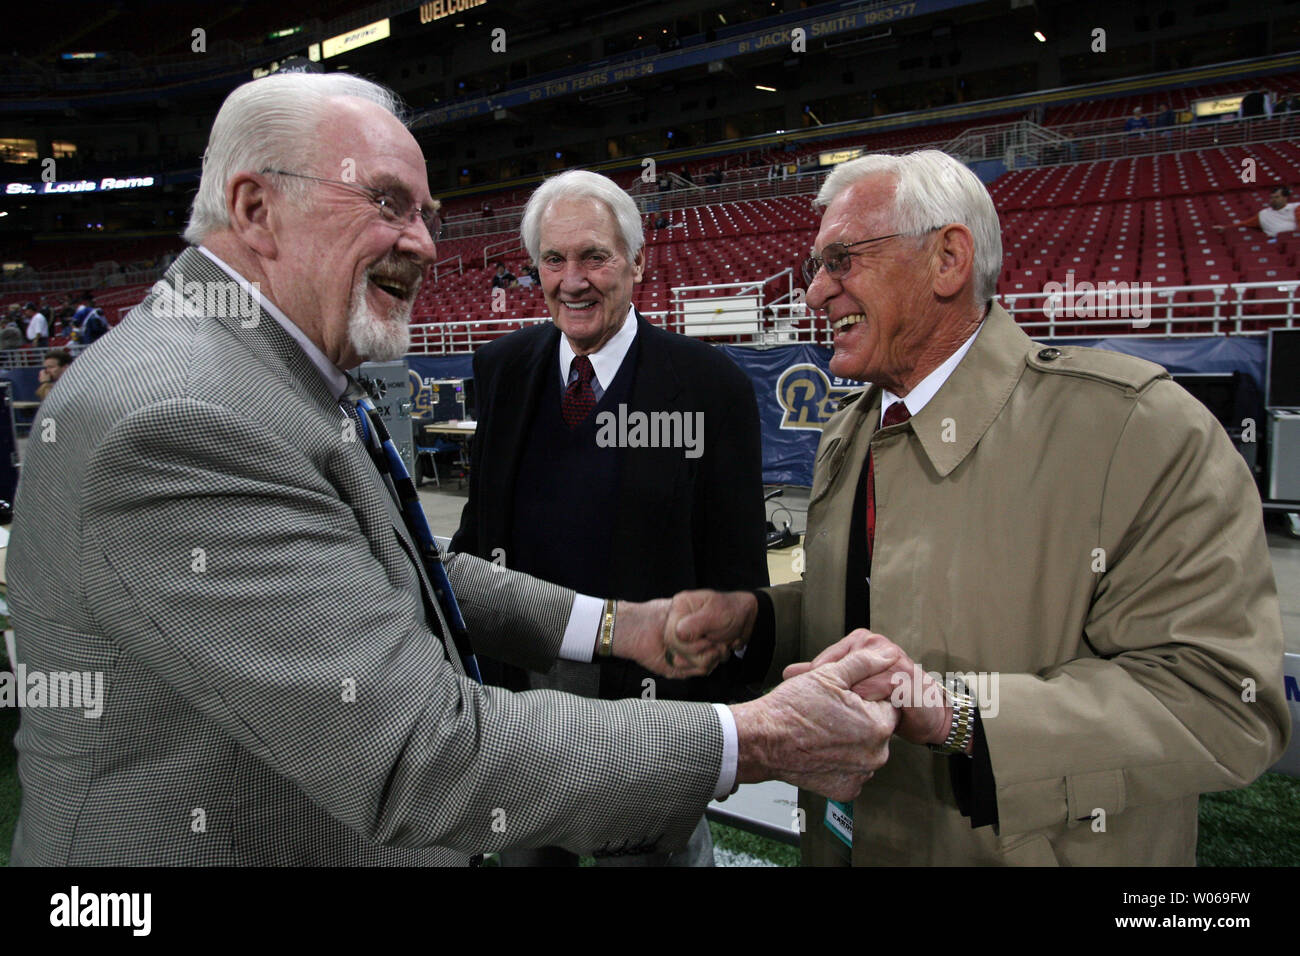 Former St. Louis Rams offensive coordinator Jim Hanifan (L) jokes with former Arizona Cardinals general manager Larry Wilson as Fox football announcer Pat Summerall (C) looks on before a game between the Arizona Cardinals and the St. Louis Rams at the Edward Jones Dome in St. Louis on December 3, 2006.  Hanifan was Wilson's coach when the two were members of the old St. Louis Cardinals football team in the 1970's. (UPI Photo/Bill Greenblatt) Stock Photo